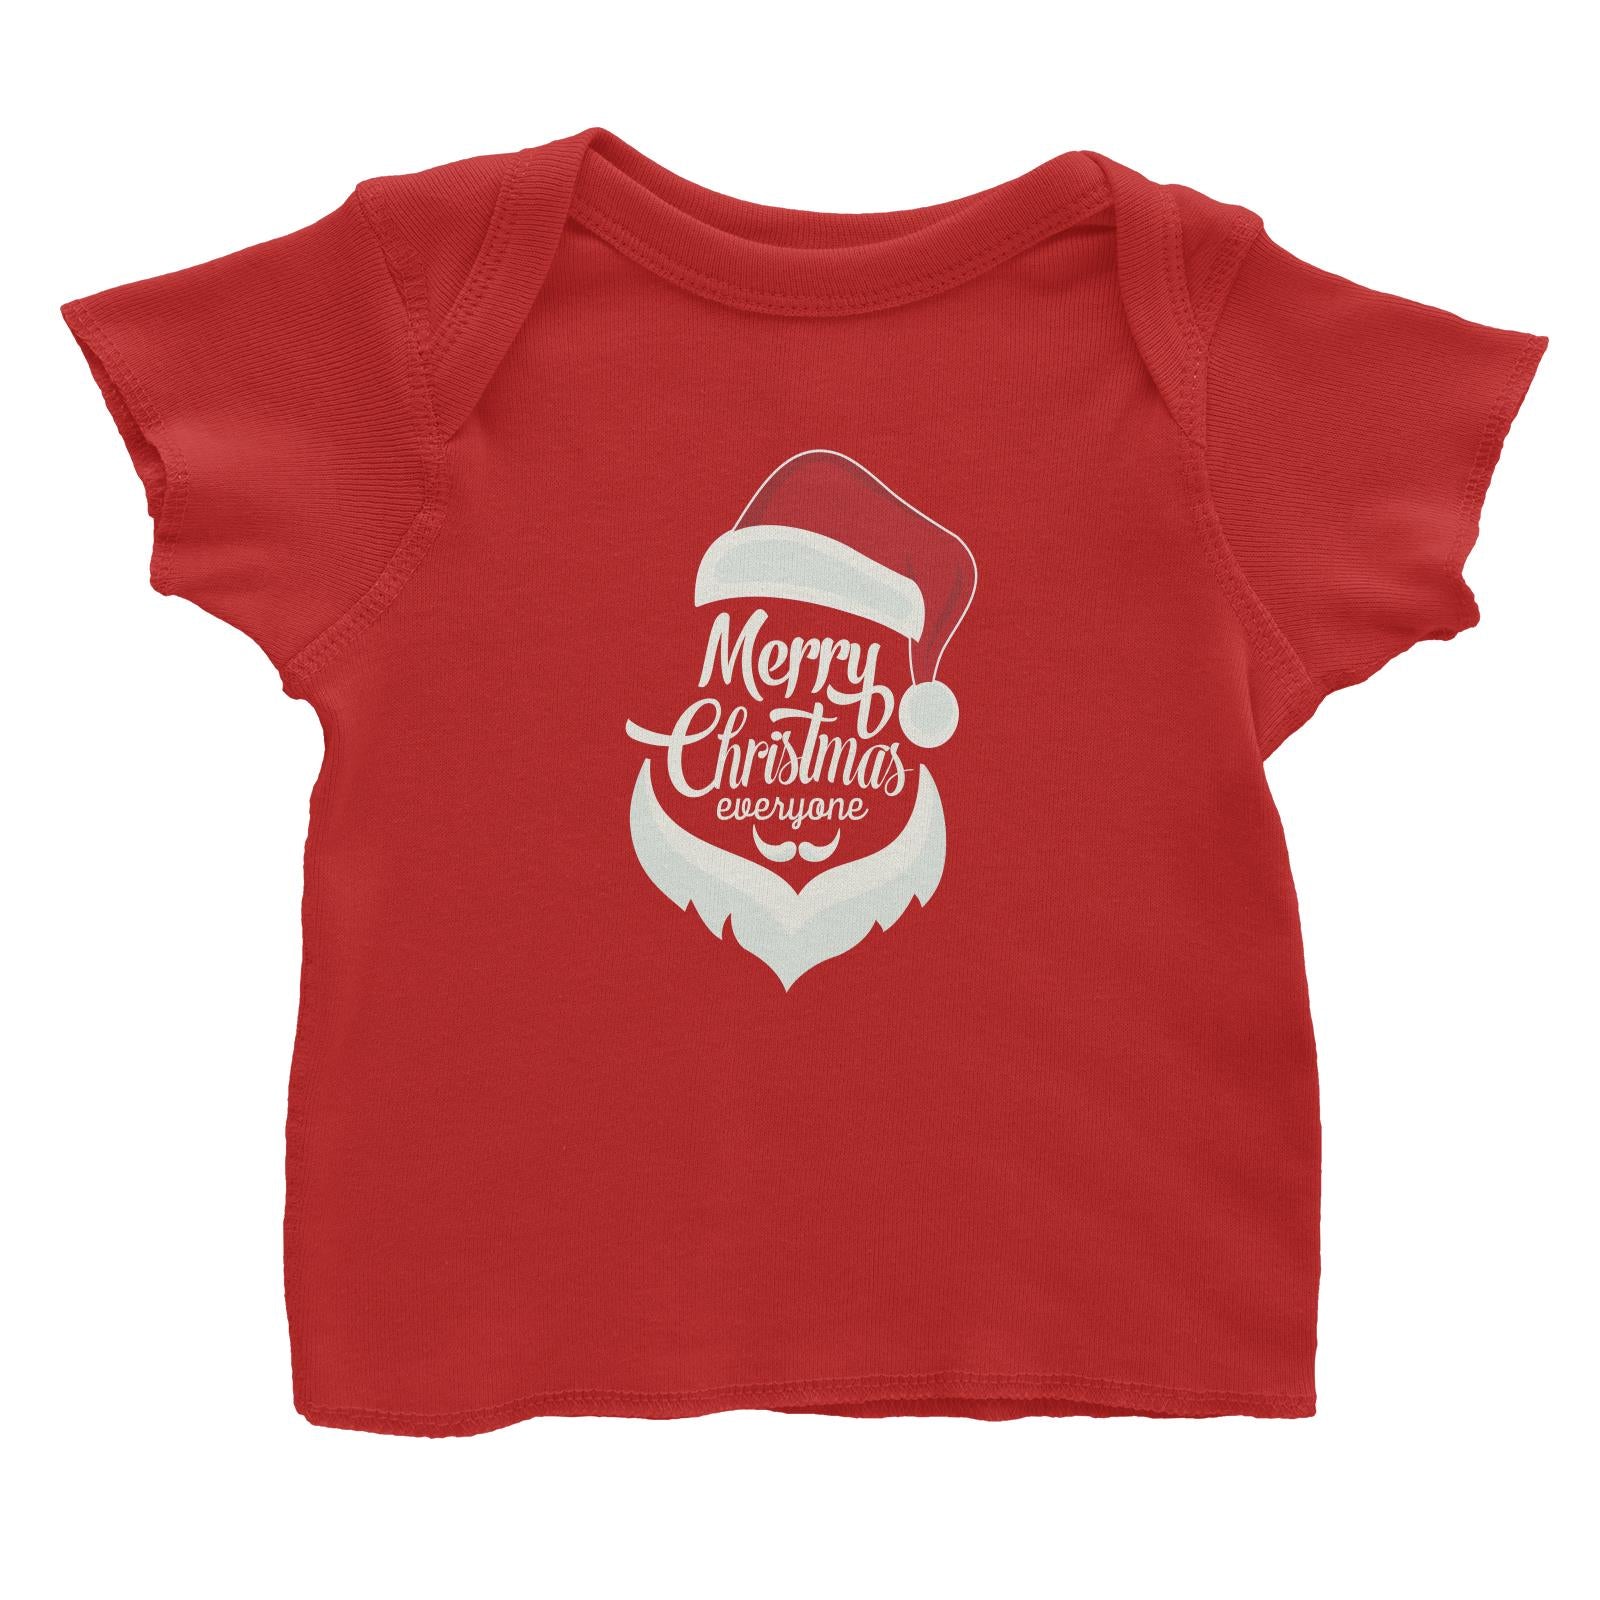 Merry Christmas Everyone with Santa Hat and Beard Baby T-Shirt  Matching Family